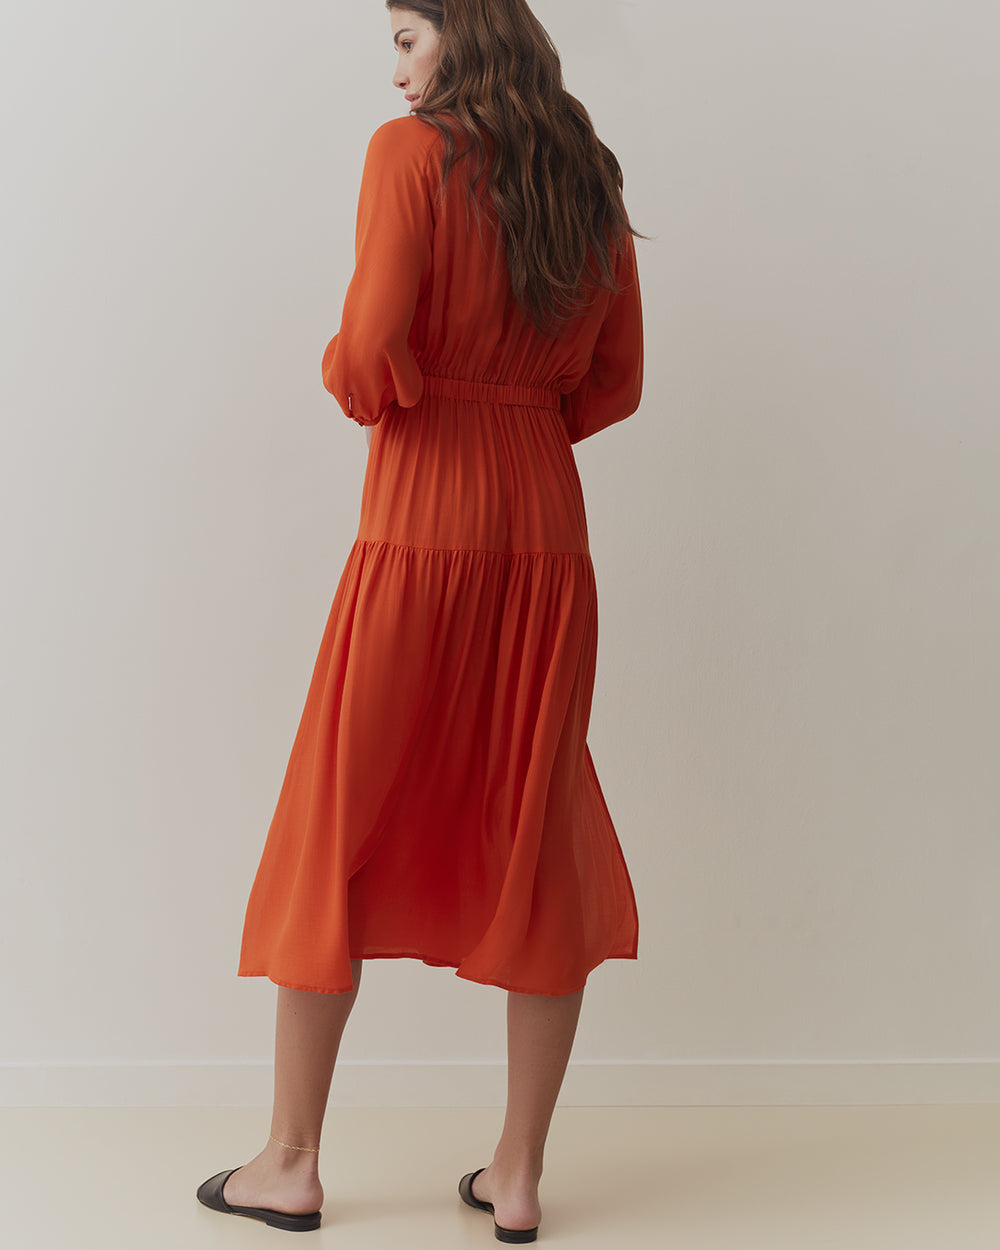 Woman in a long-sleeved dress, viewed from the back, standing indoors.